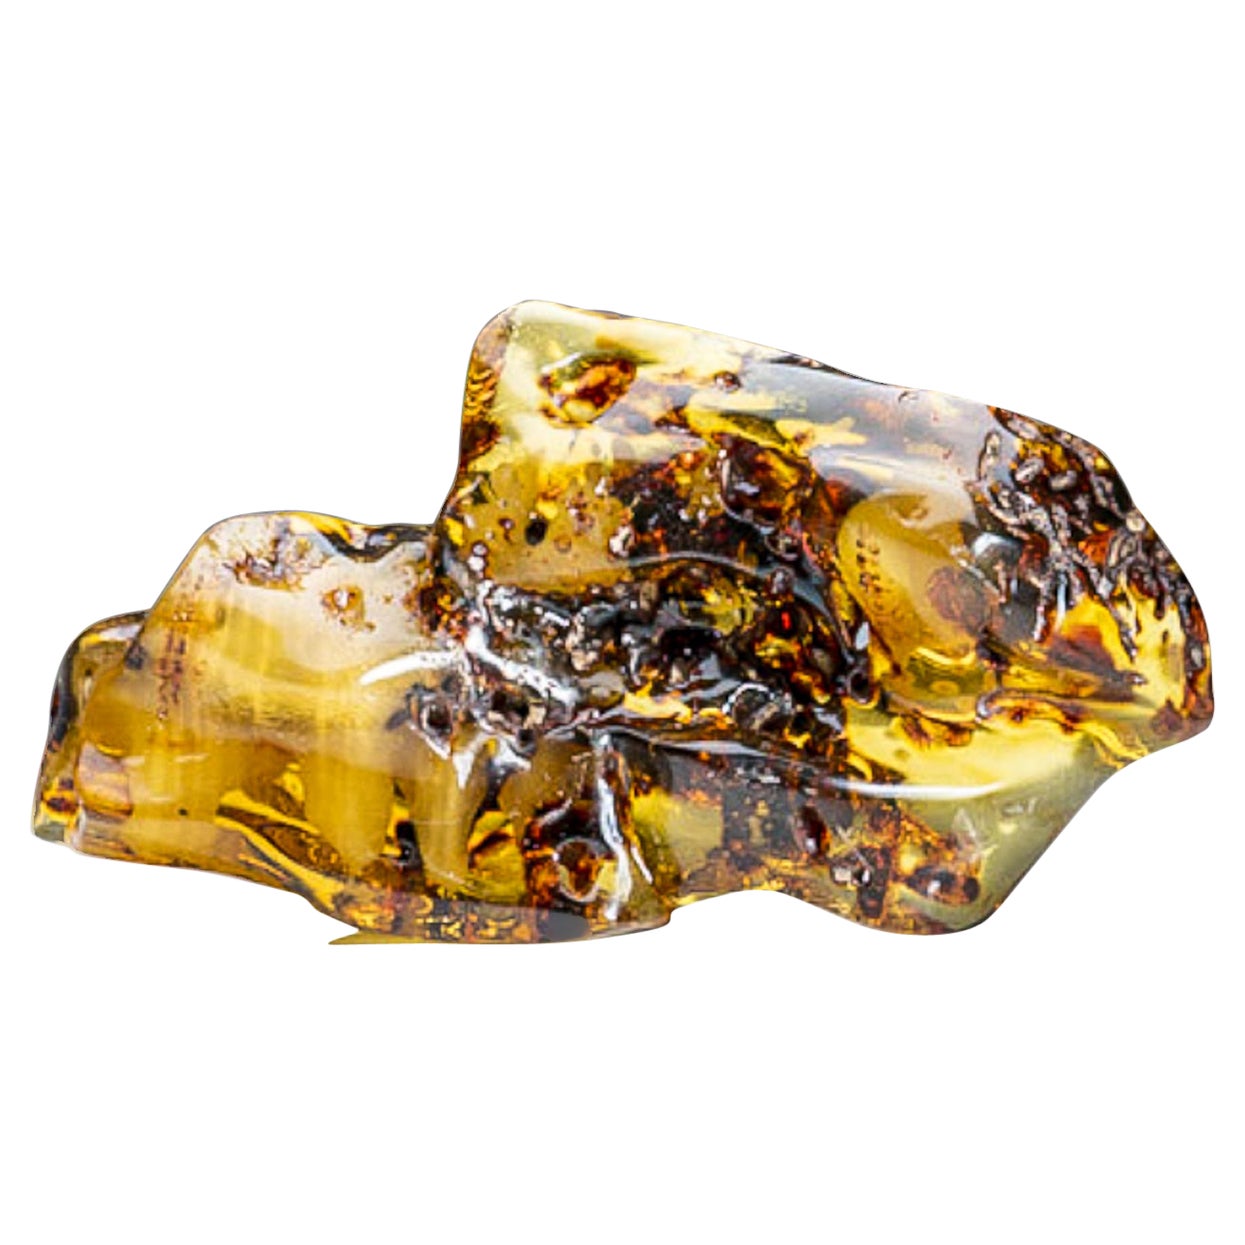 Genuine Gem-Quality Copal Amber from Colombia (362.8 grams) For Sale